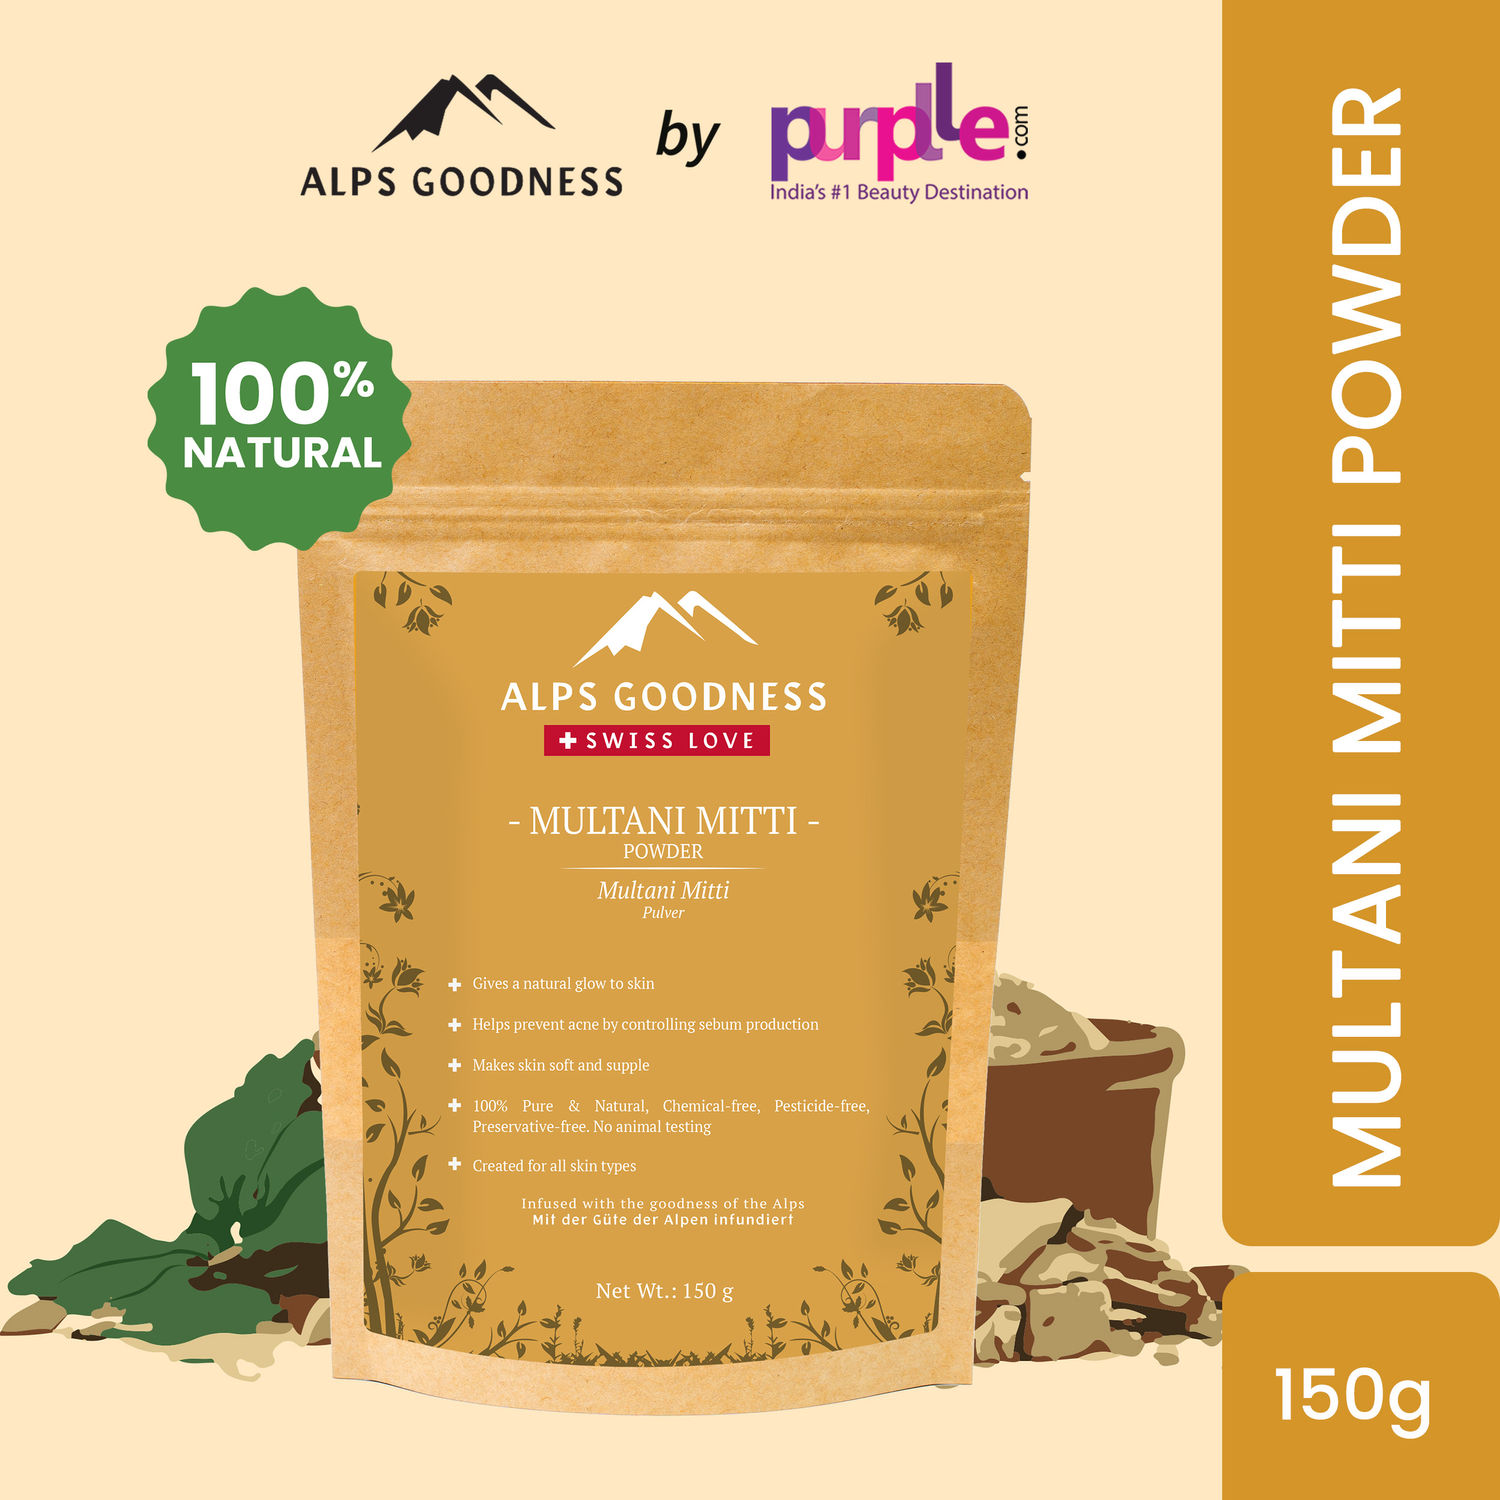 Alps Goodness Powder - Multani Mitti (150 g)| Fuller's Earth| 100% Natural Powder | No Chemicals, No Preservatives, No Pesticides| Hydrating Face Mask